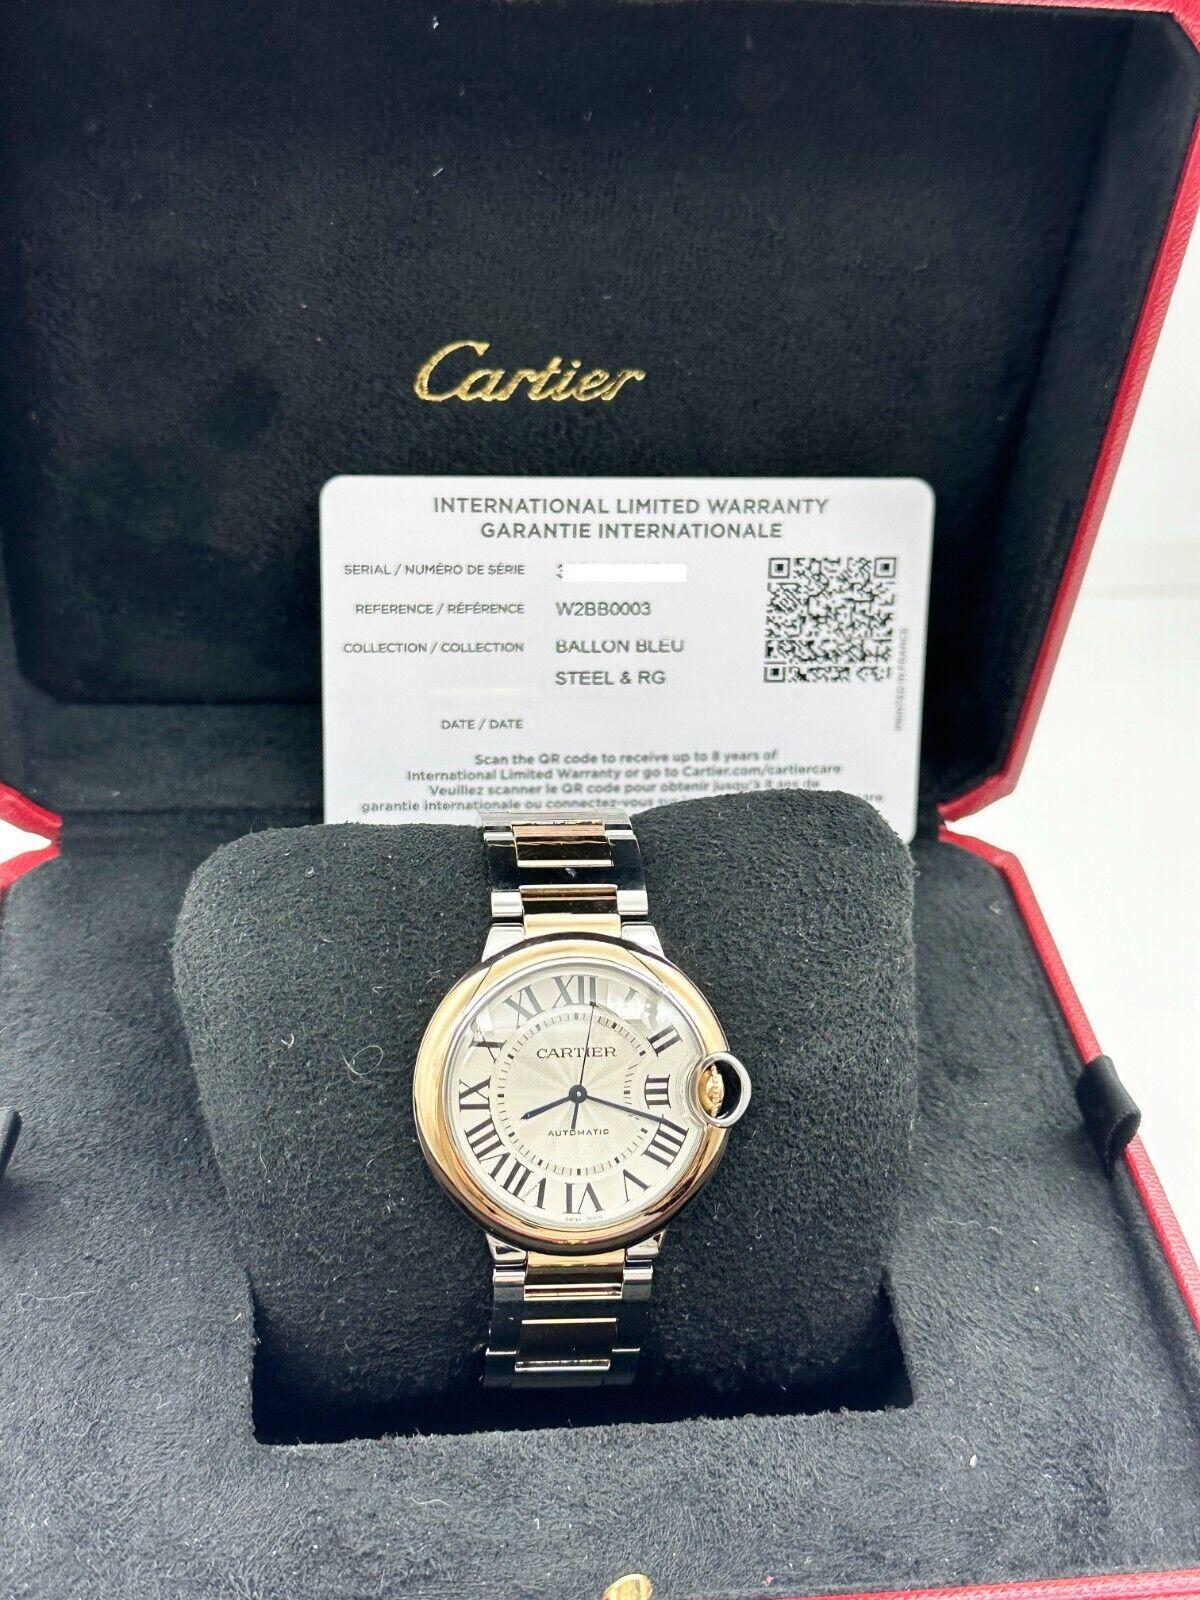 Style Number: W2BB0003

Model: Ballon Bleu

Case Material: Stainless Steel 

Band: 18K Rose Gold & Stainless Steel 

Bezel:  18K Rose Gold 

Dial: Silver Guilloche

Face: Sapphire Crystal 

Case Size: 36mm 

Includes: 

-Cartier Box

-Certified